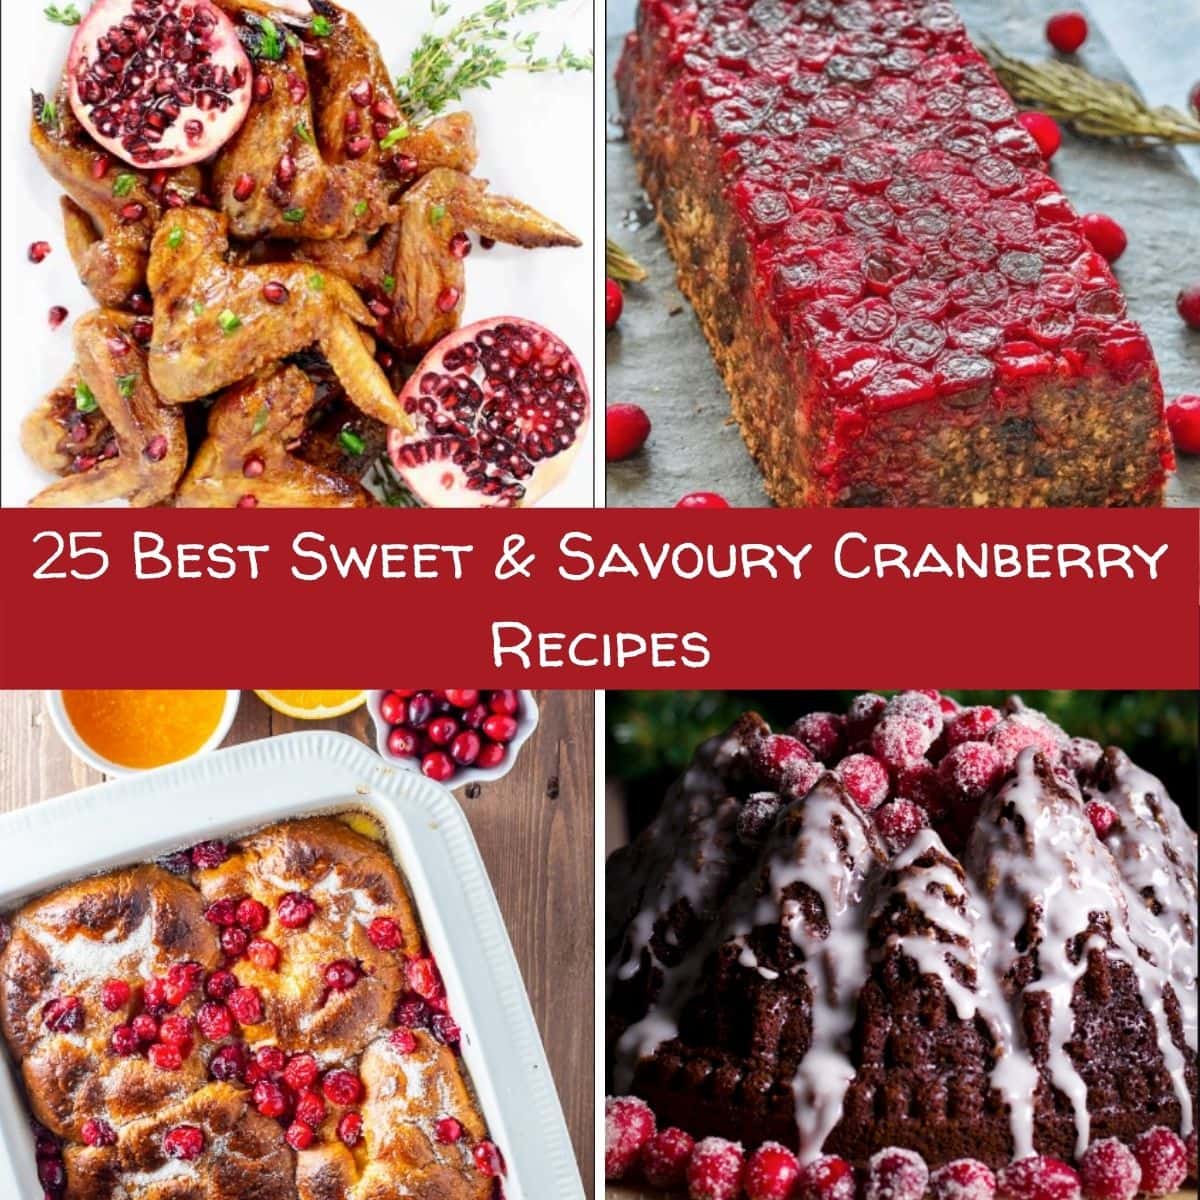 4 photos using cranberries from recipes in roundup